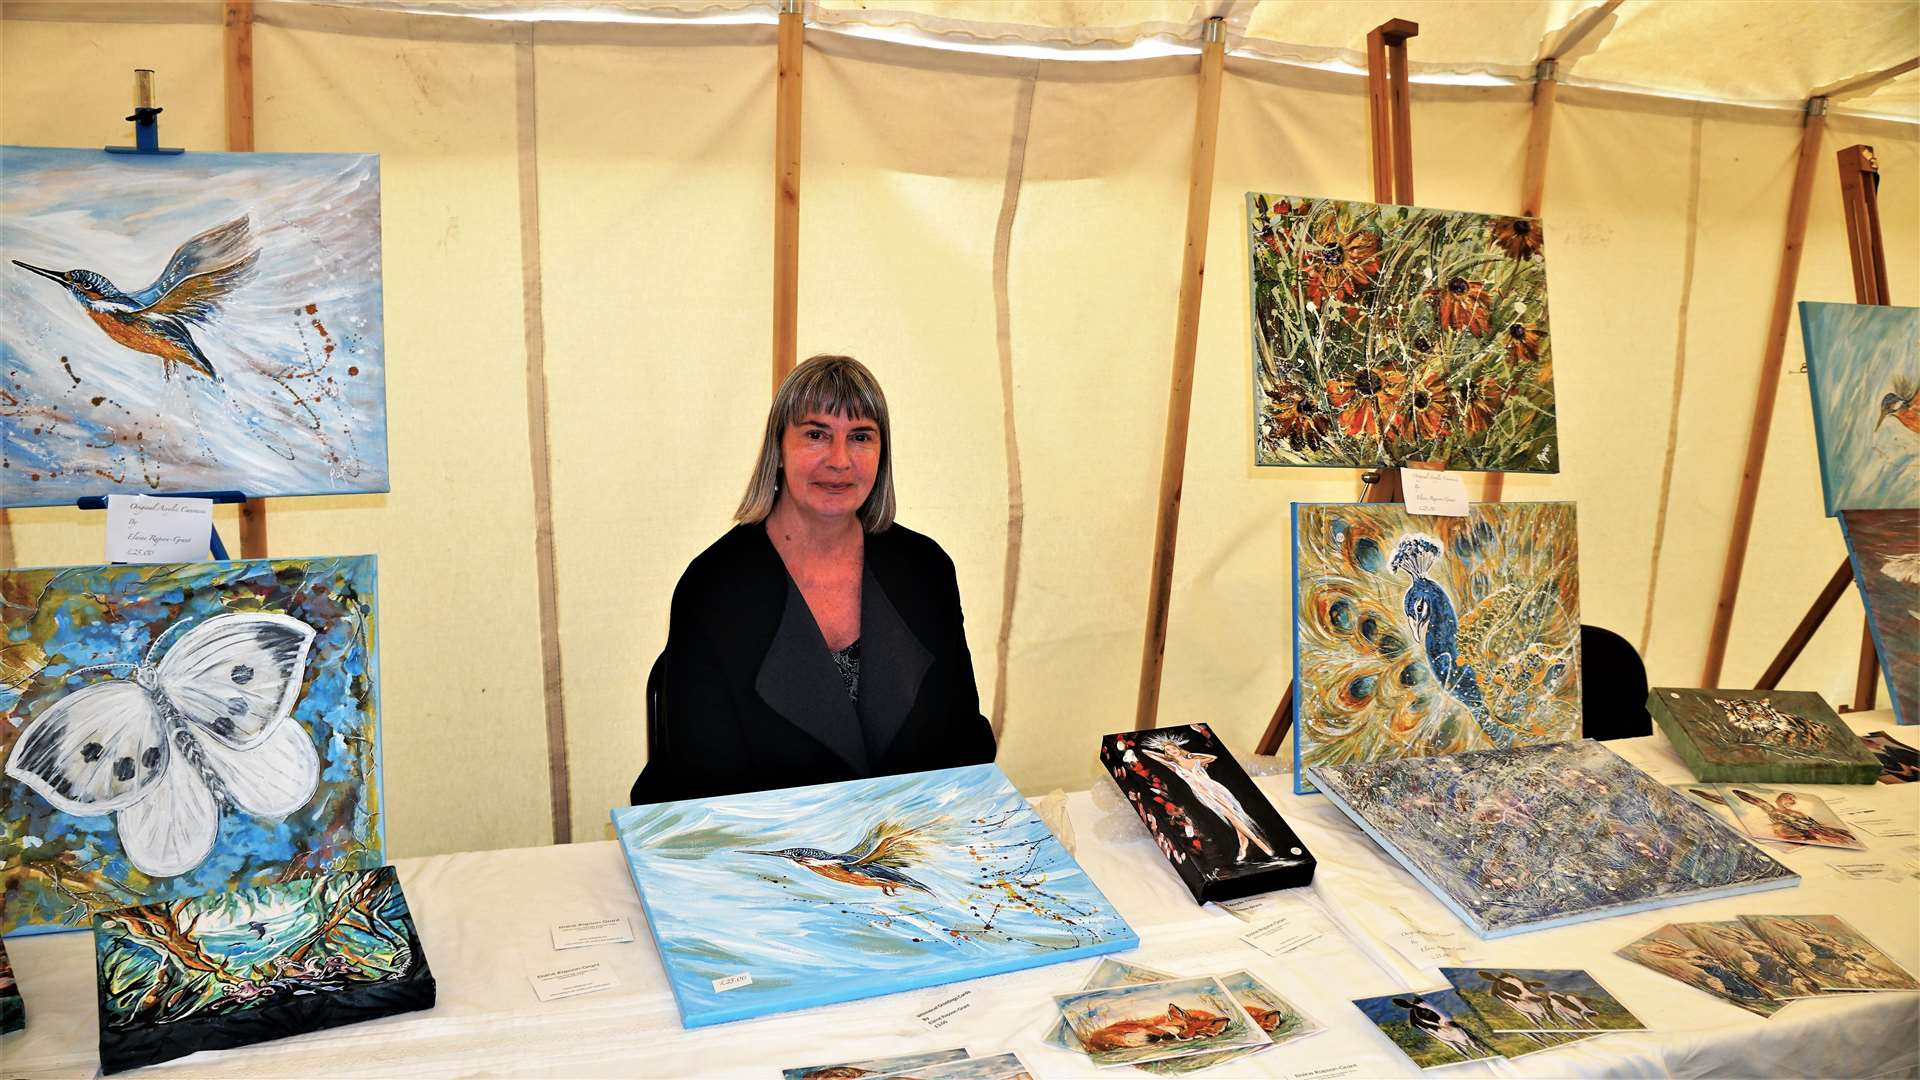 Elaine Rapson-Grant from Scrabster did some brisk trade selling her artworks at the event. Picture: DGS